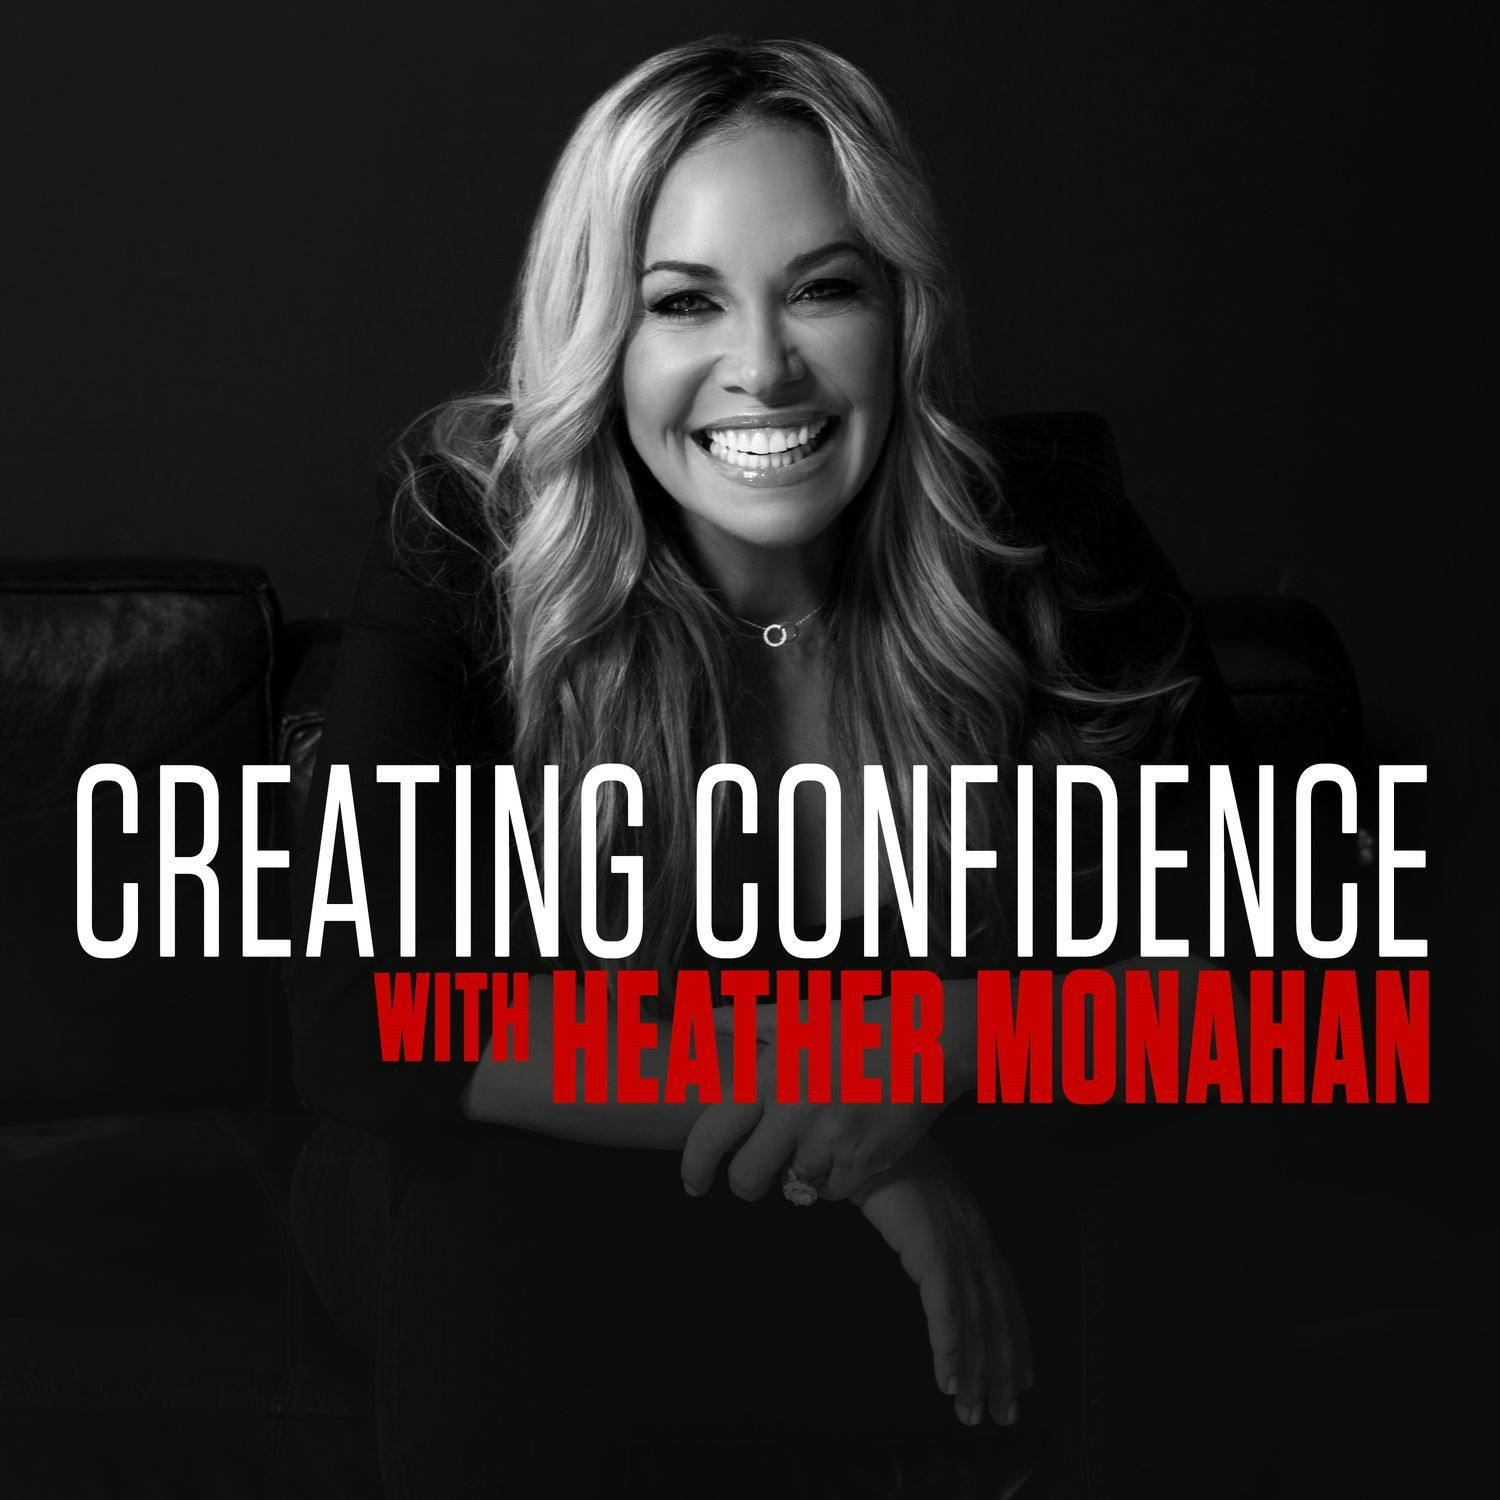 #165: Take Your Life From Negative To POSITIVE With Jon Gordon Best Selling Author & Leadership Speaker  by Heather Monahan | YAP Media Network